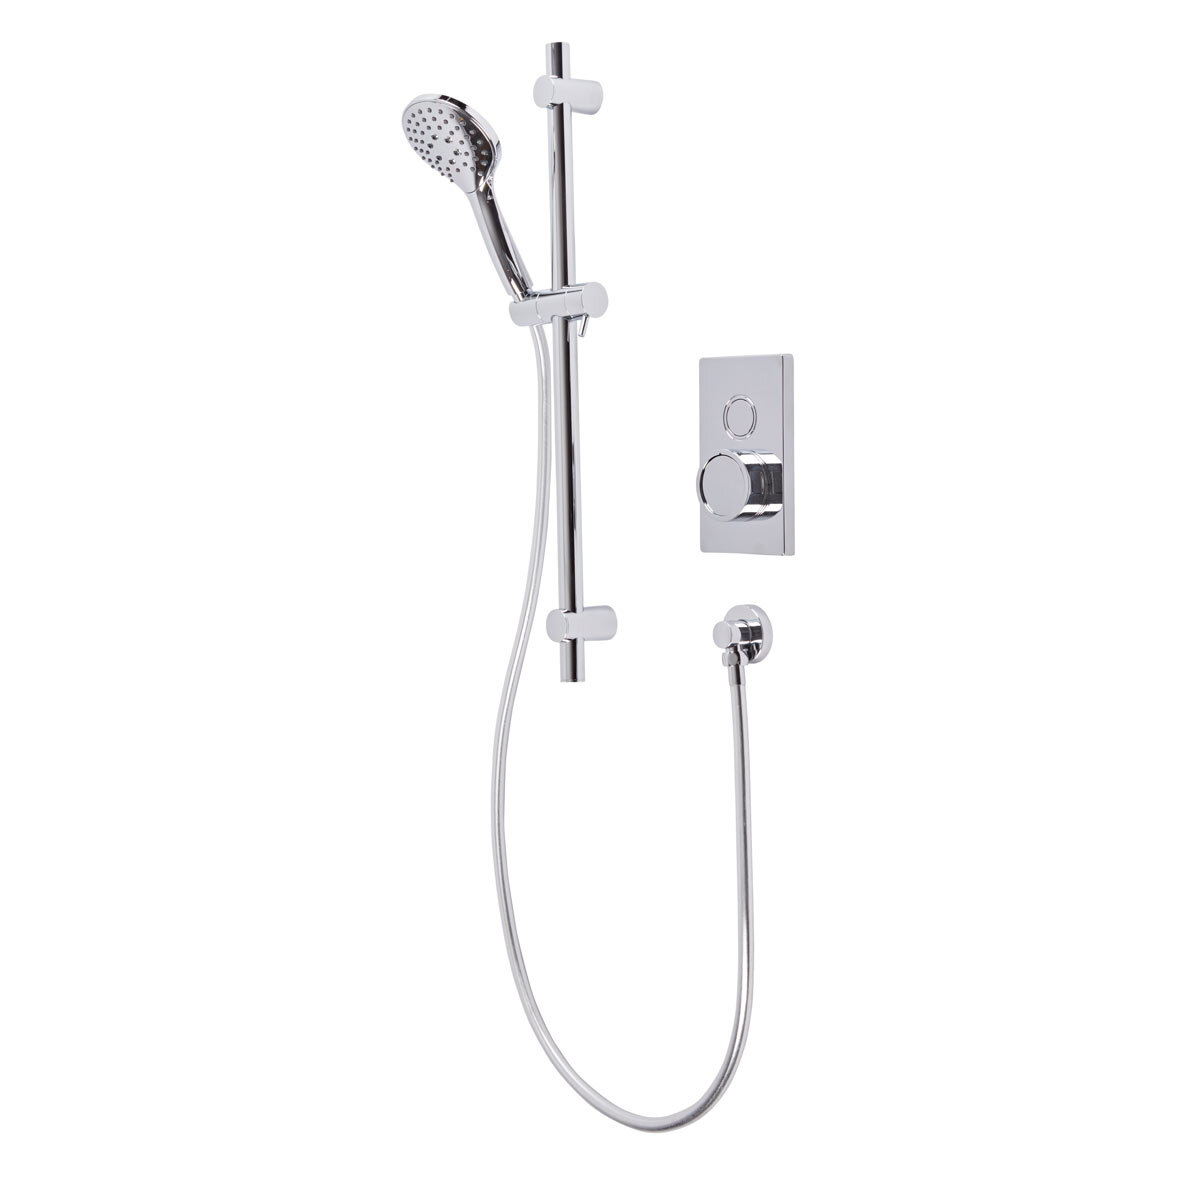 Cut out image of shower on white background